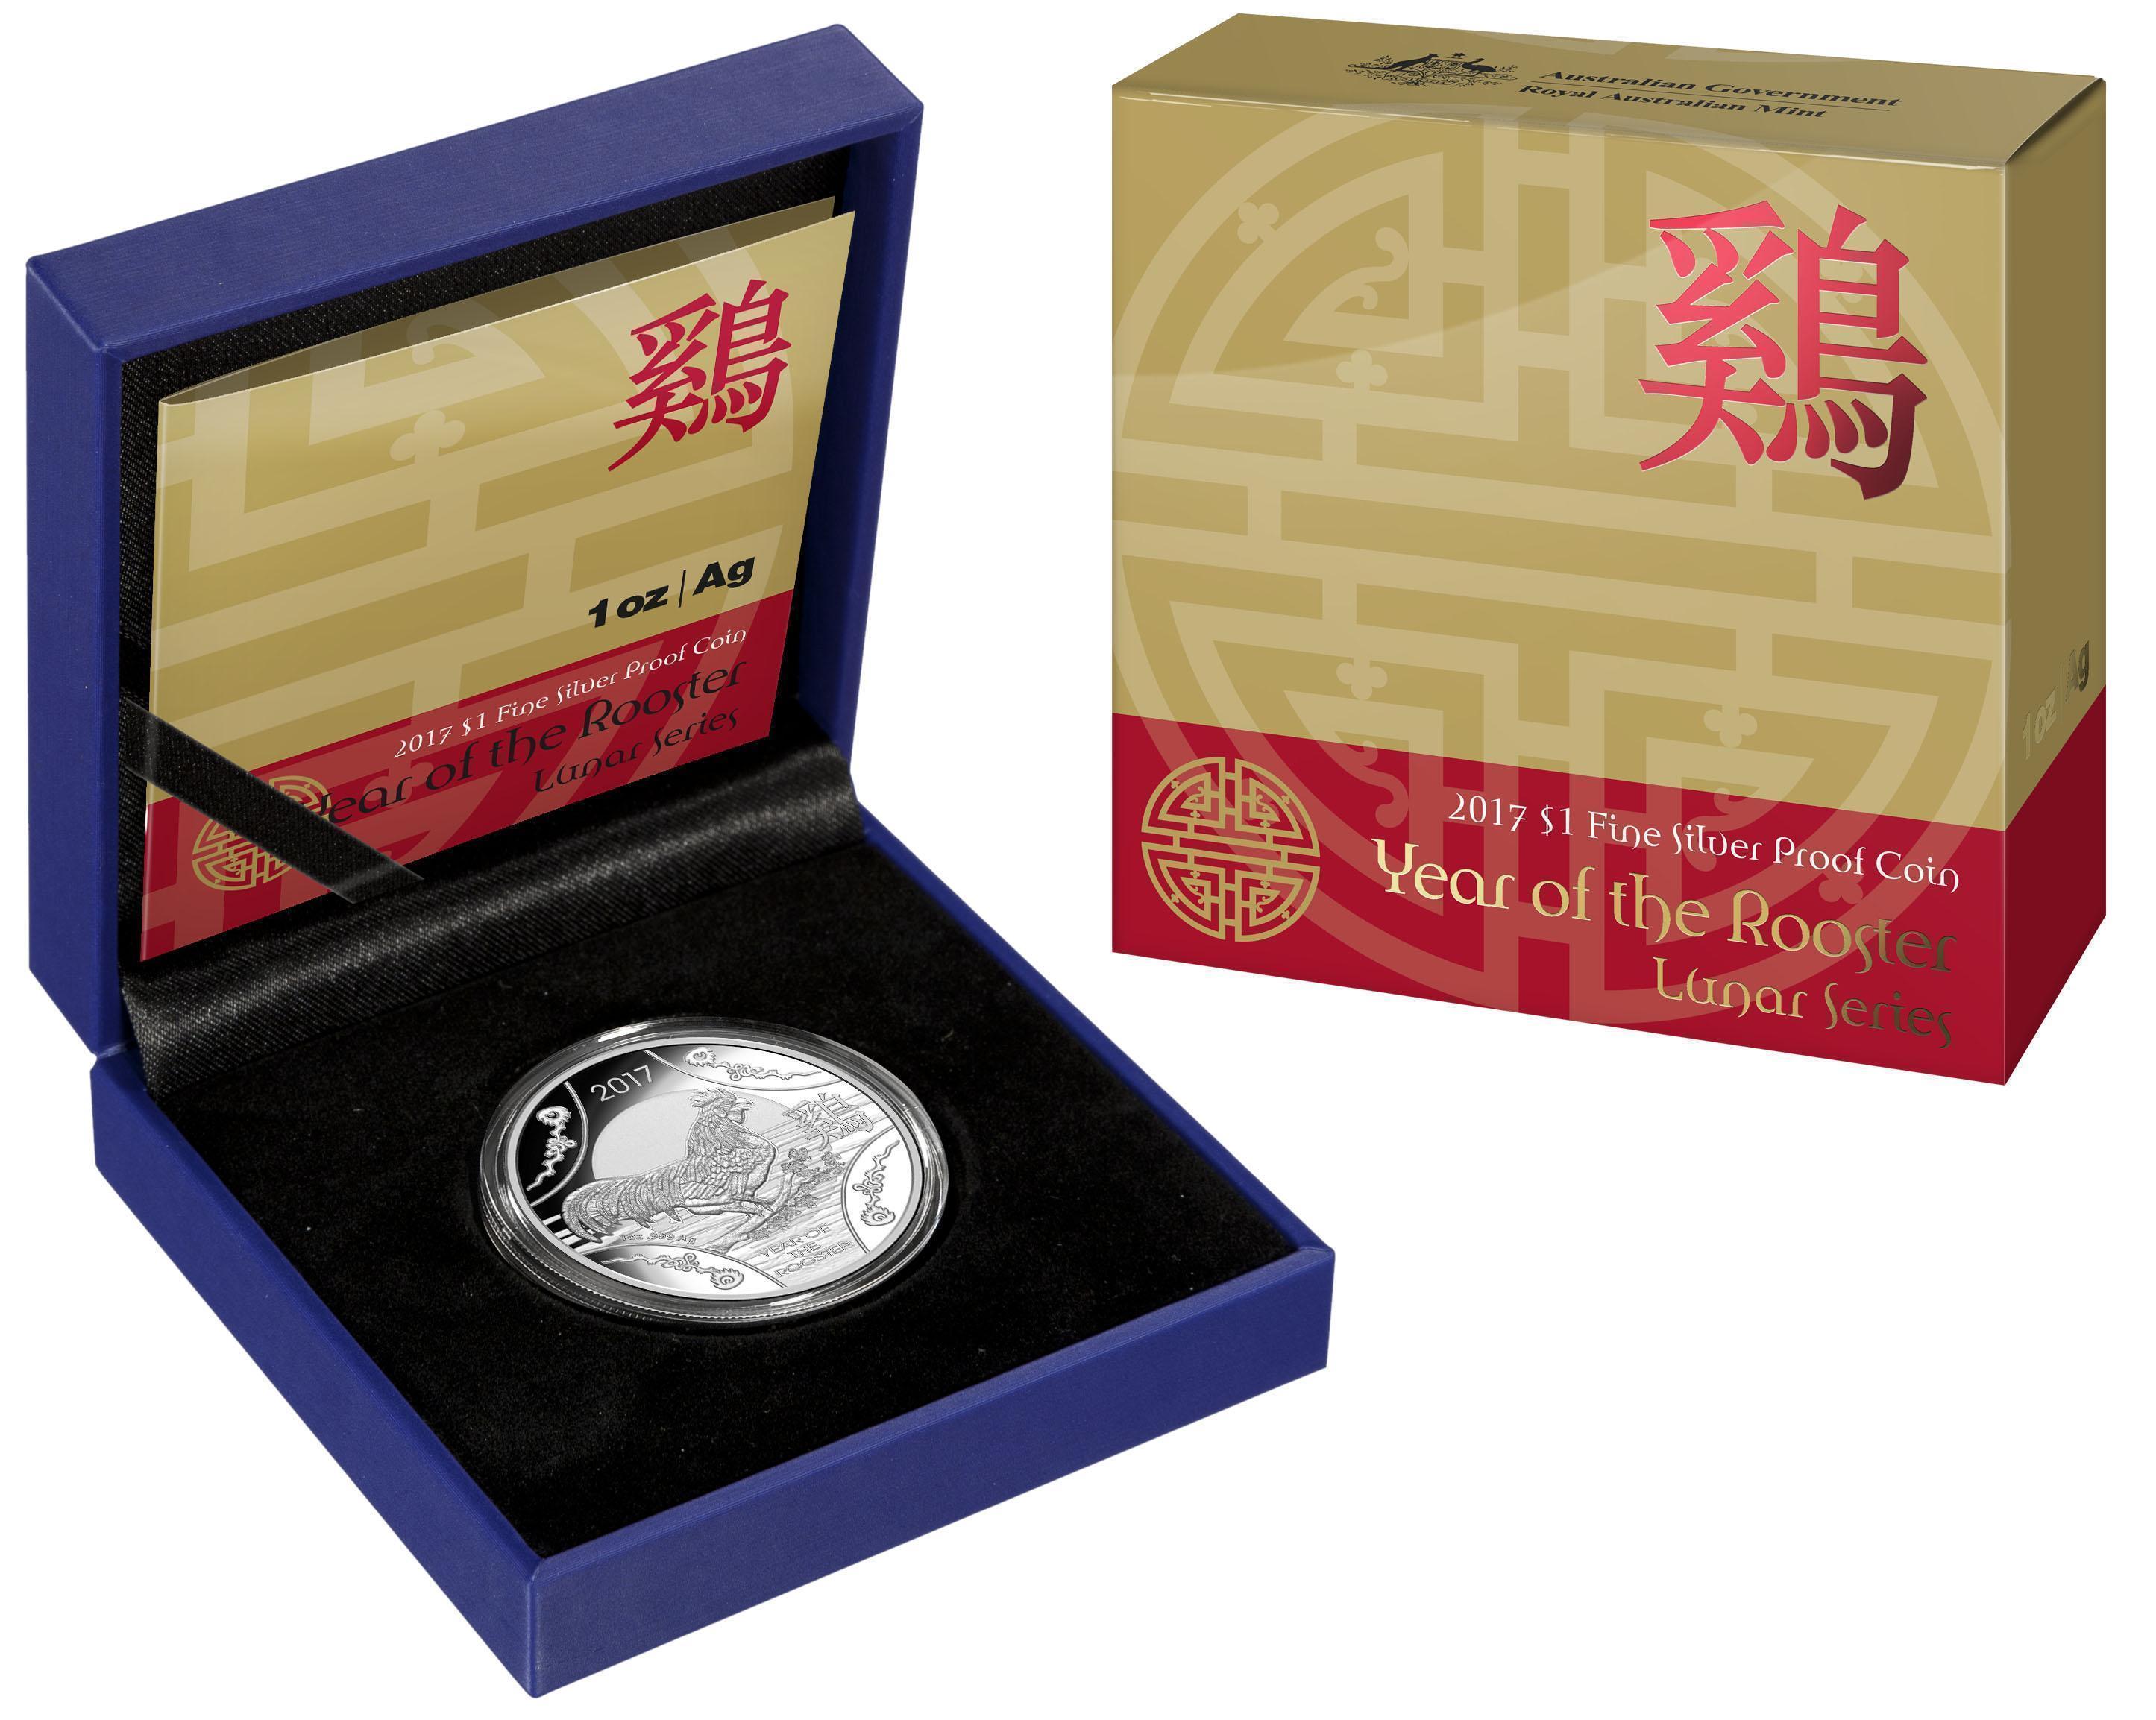 2017 $1 1oz Fine Silver Proof Uncirculated Coin Year of the Rooster Lunar Series